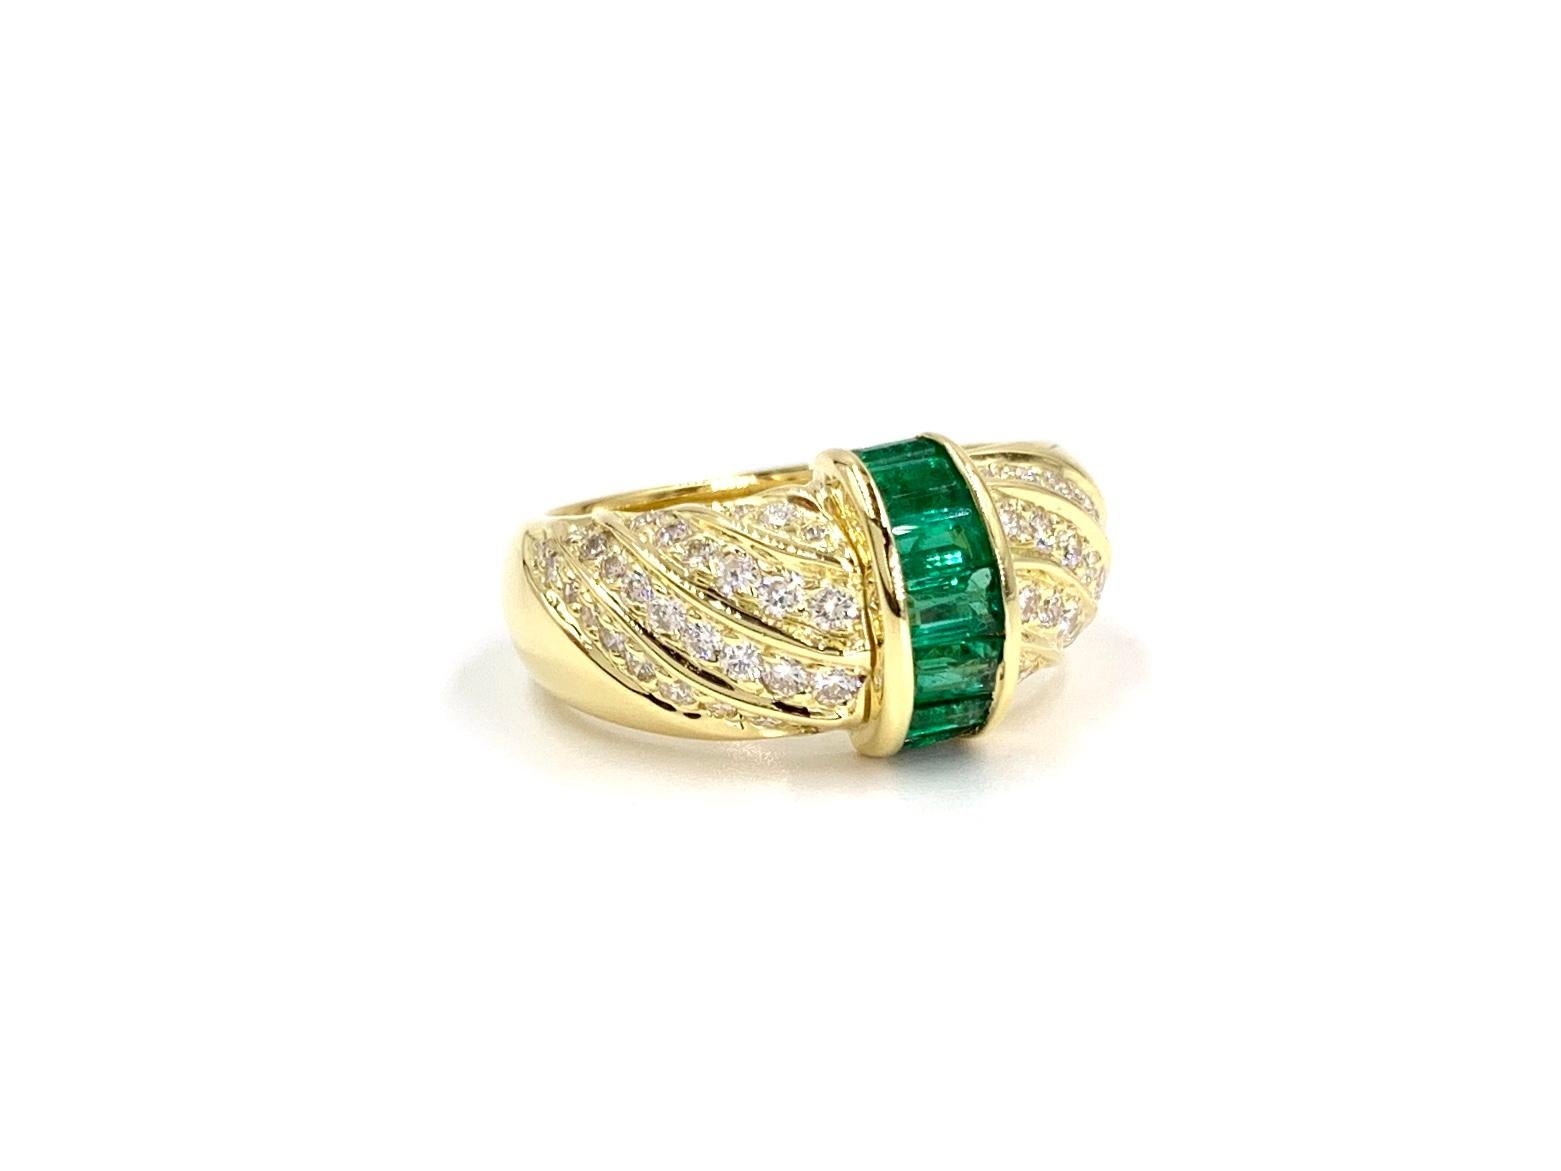 A high polished 18 karat yellow gold modern emerald and diamond ring created by Gumuchian. This slightly domed ring features 7 high quality channel set emerald cut green emeralds at .65 carats total weight flanked by .59 carats of bead set round